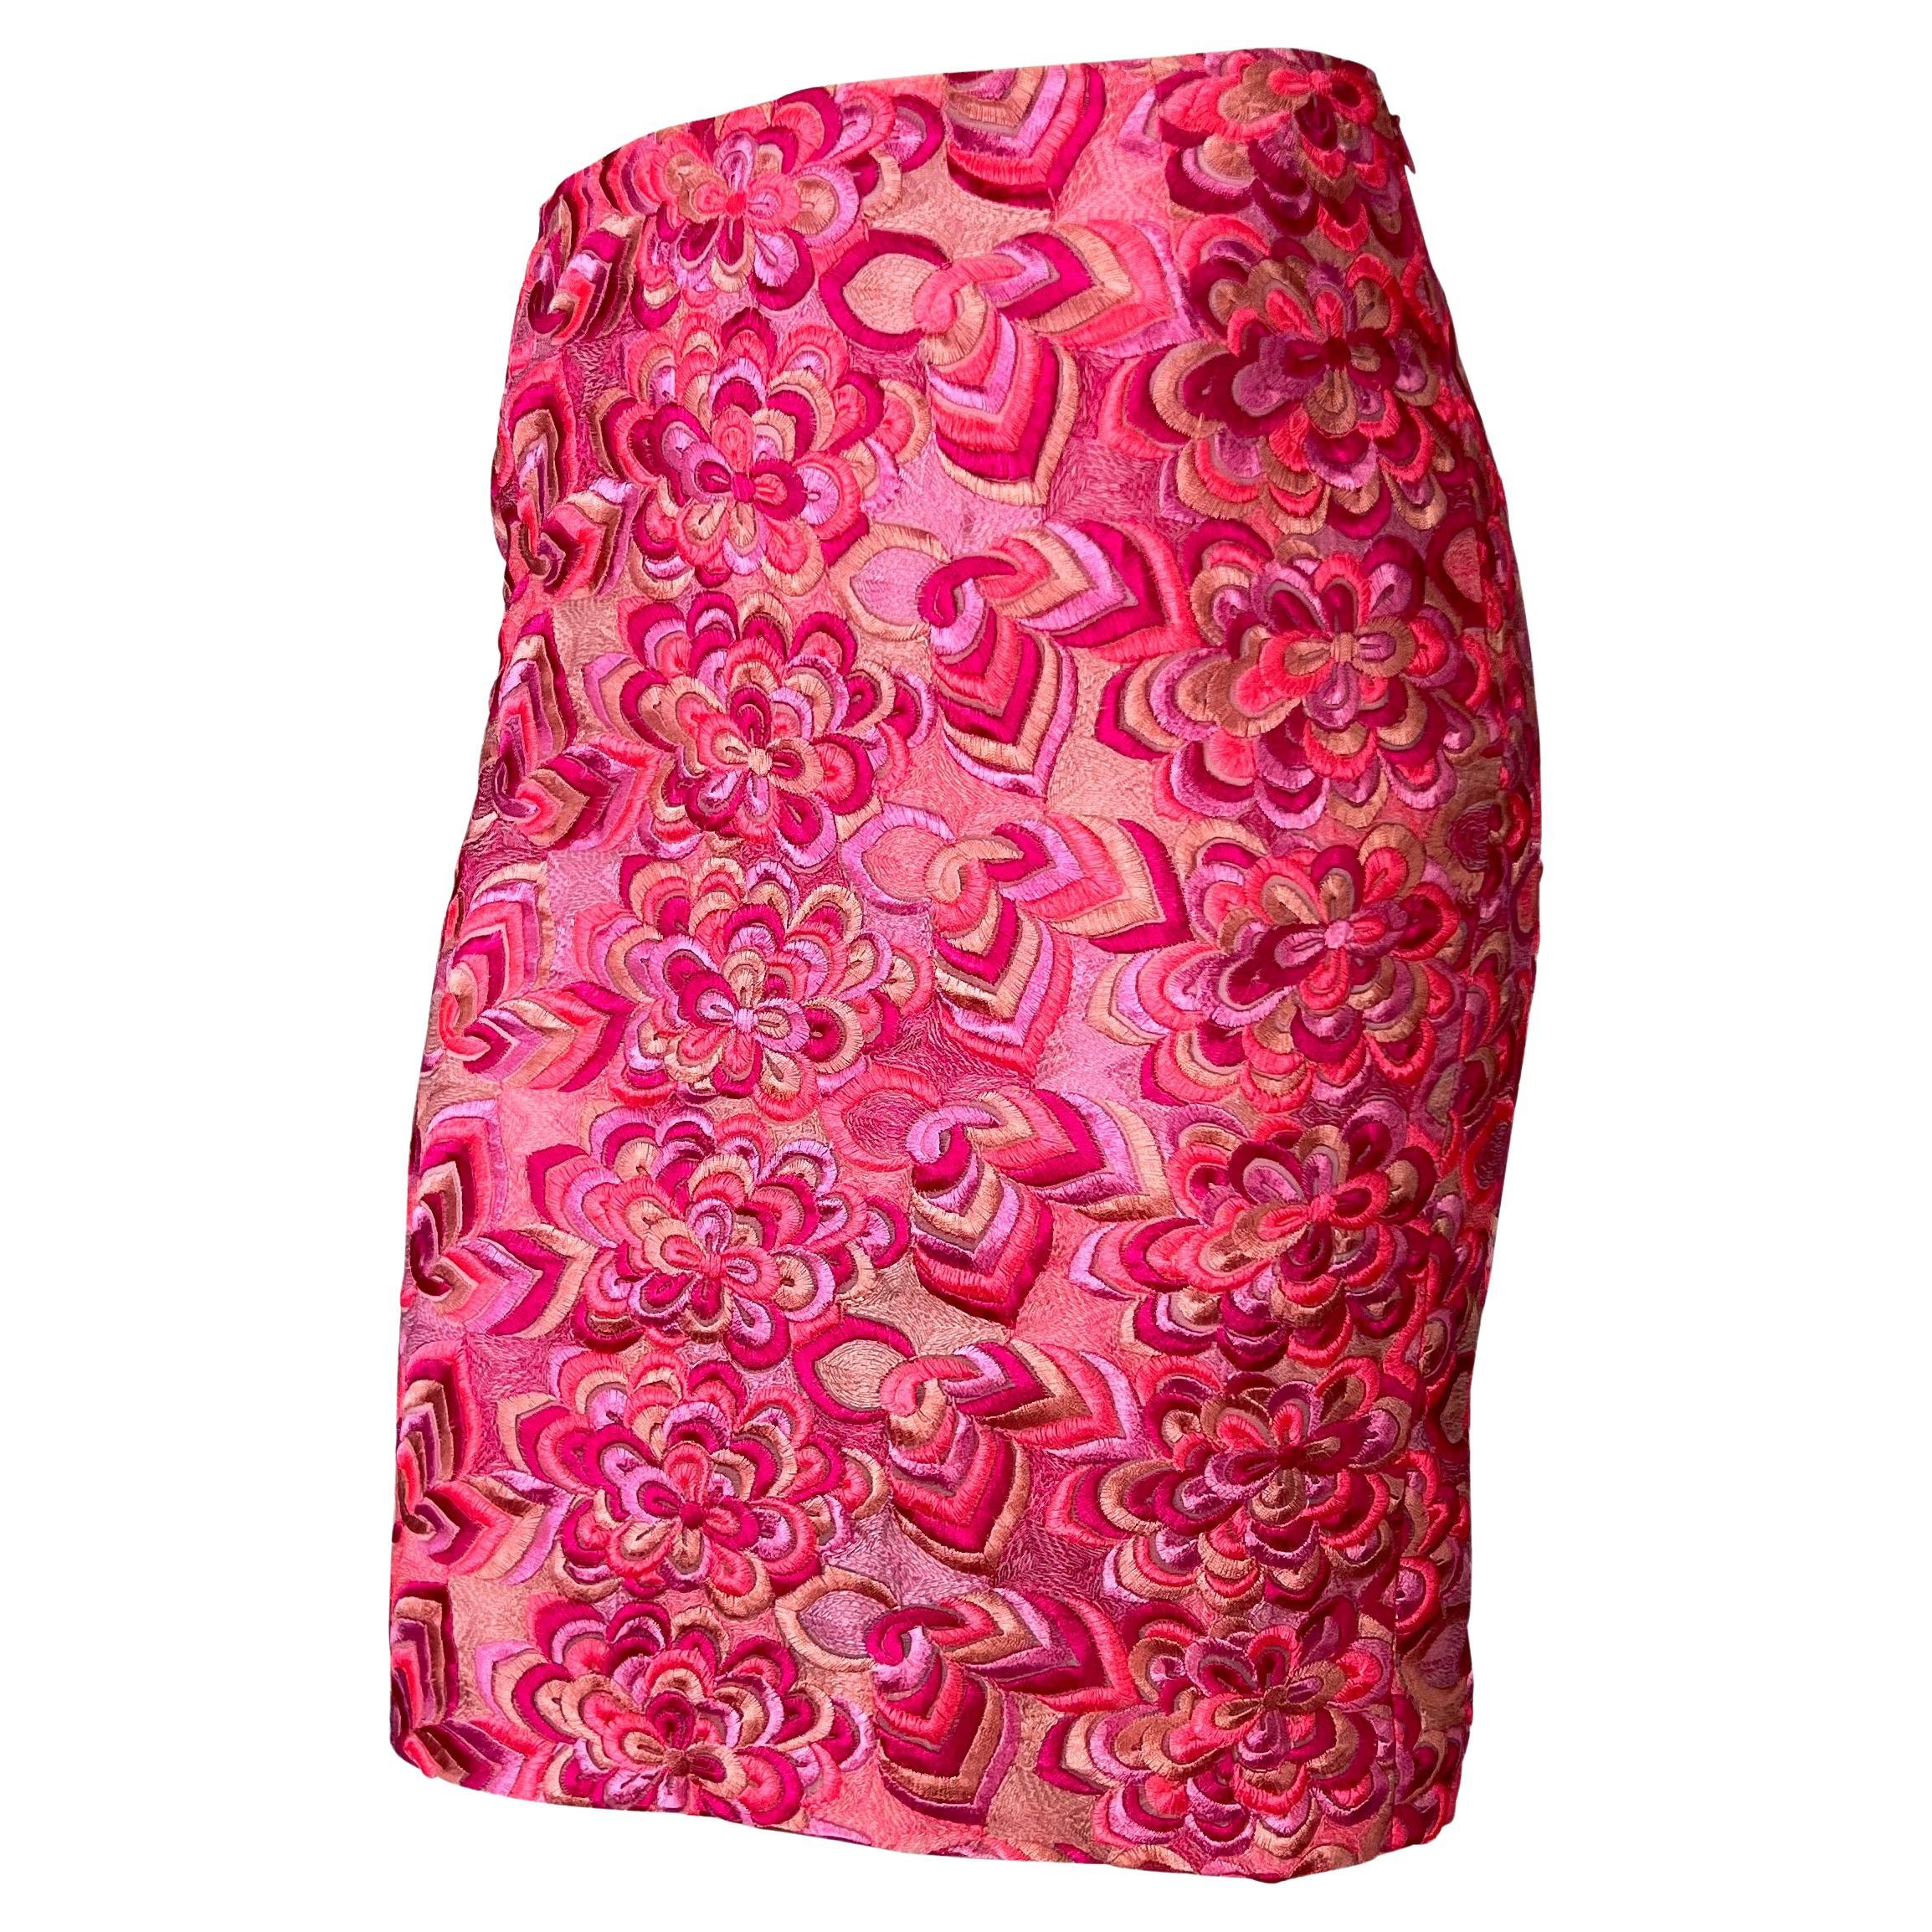 Presenting a hot pink skirt completely covered in intricate floral embroidery designed by Donatella for her landmark Spring/Summer 2000 collection for the Gianni Versace label. A rare find, this Y2K beauty is masterfully tapered to hug the body. 

